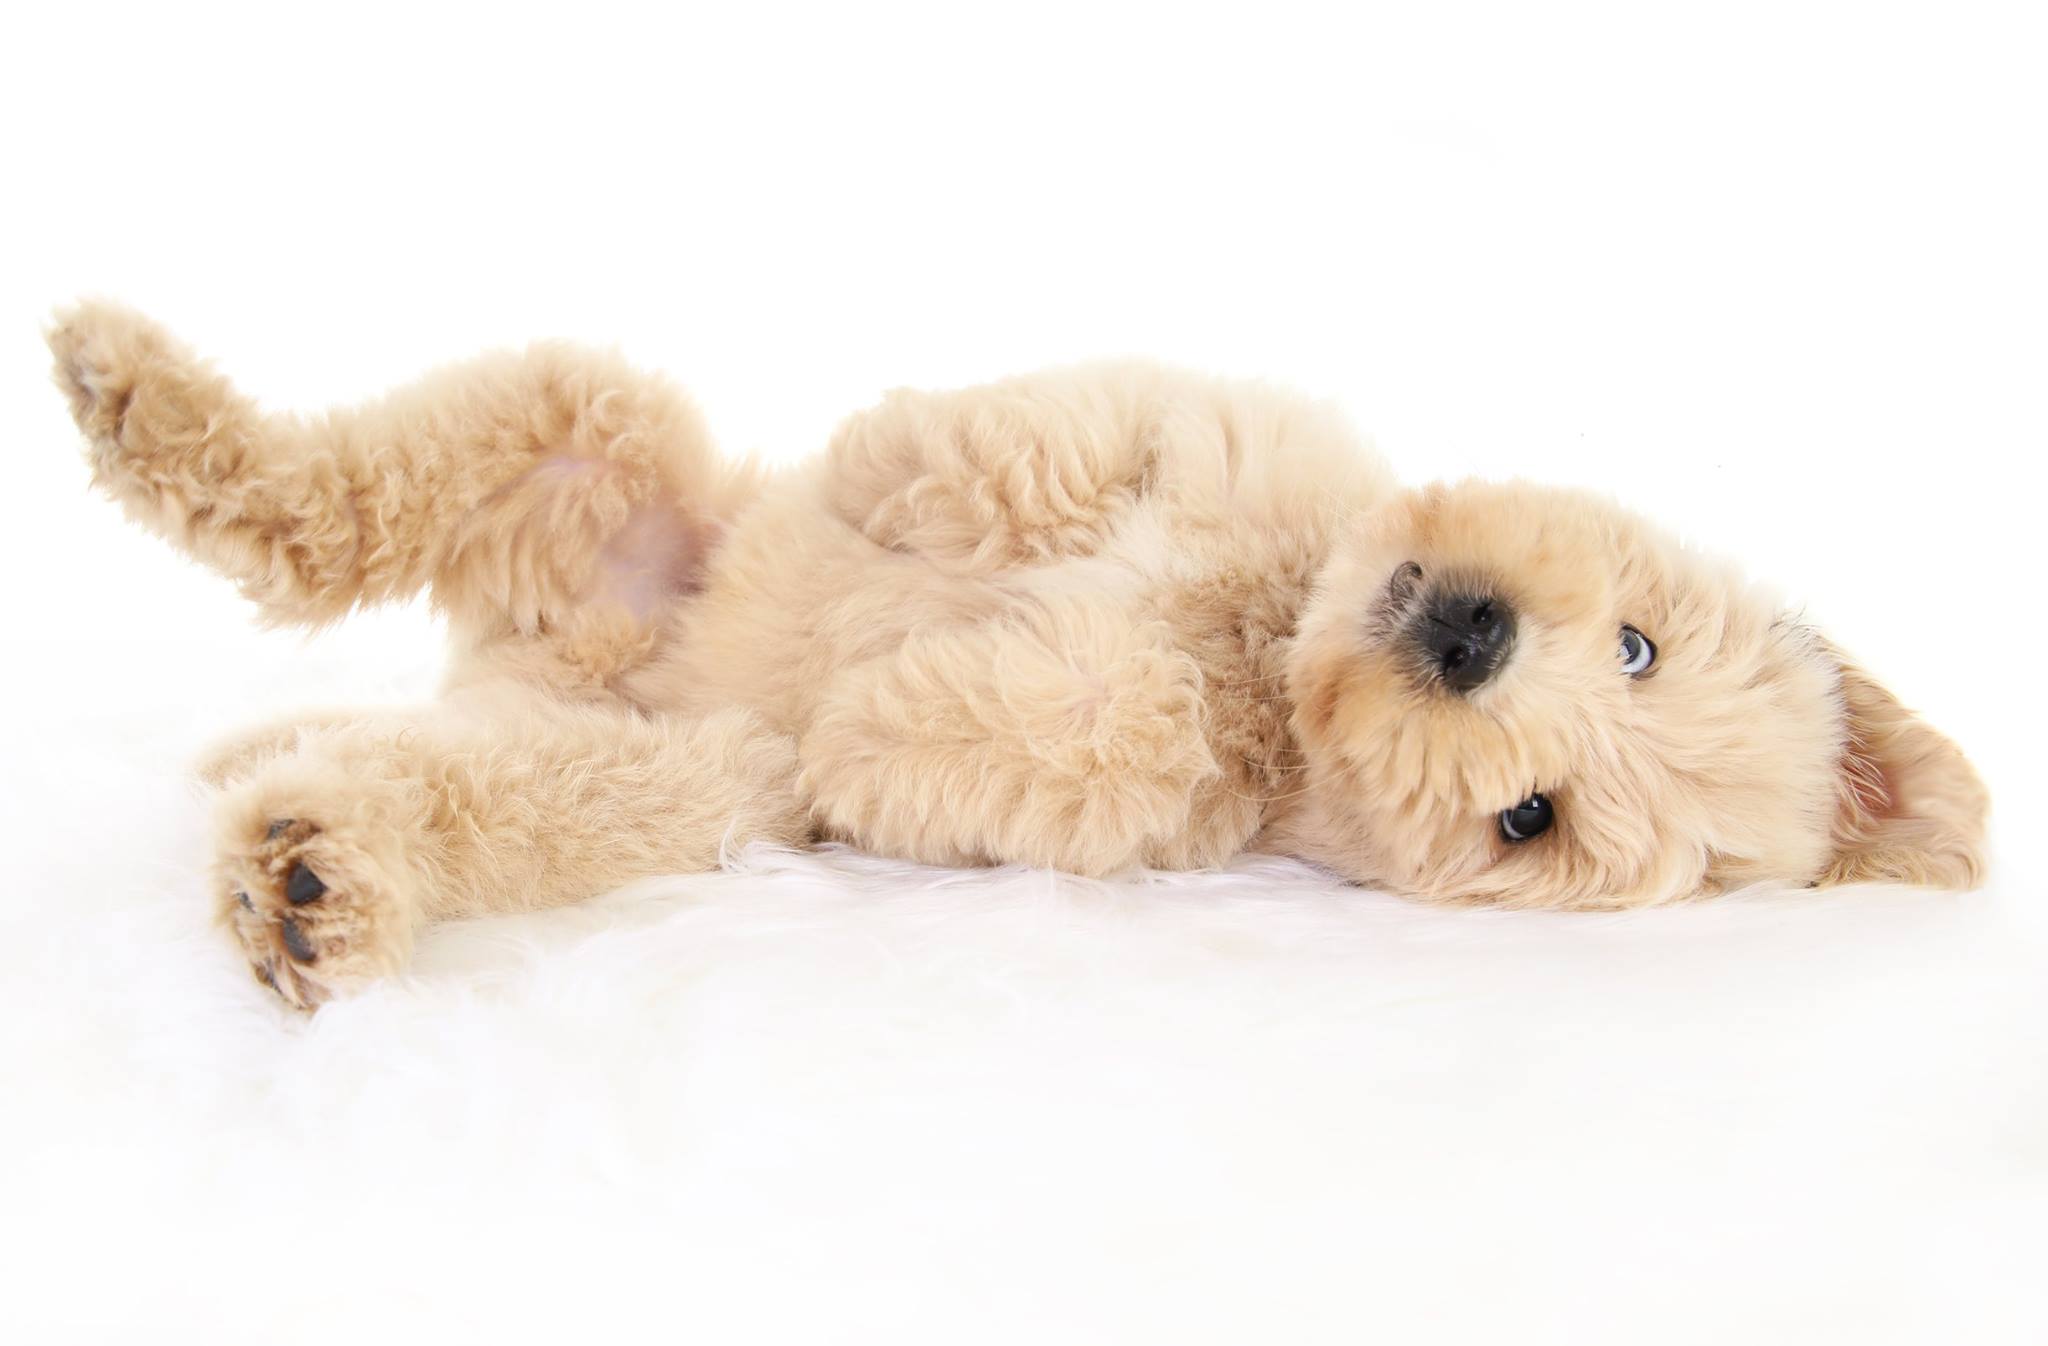 A Silly Goldendoodle laying on its back